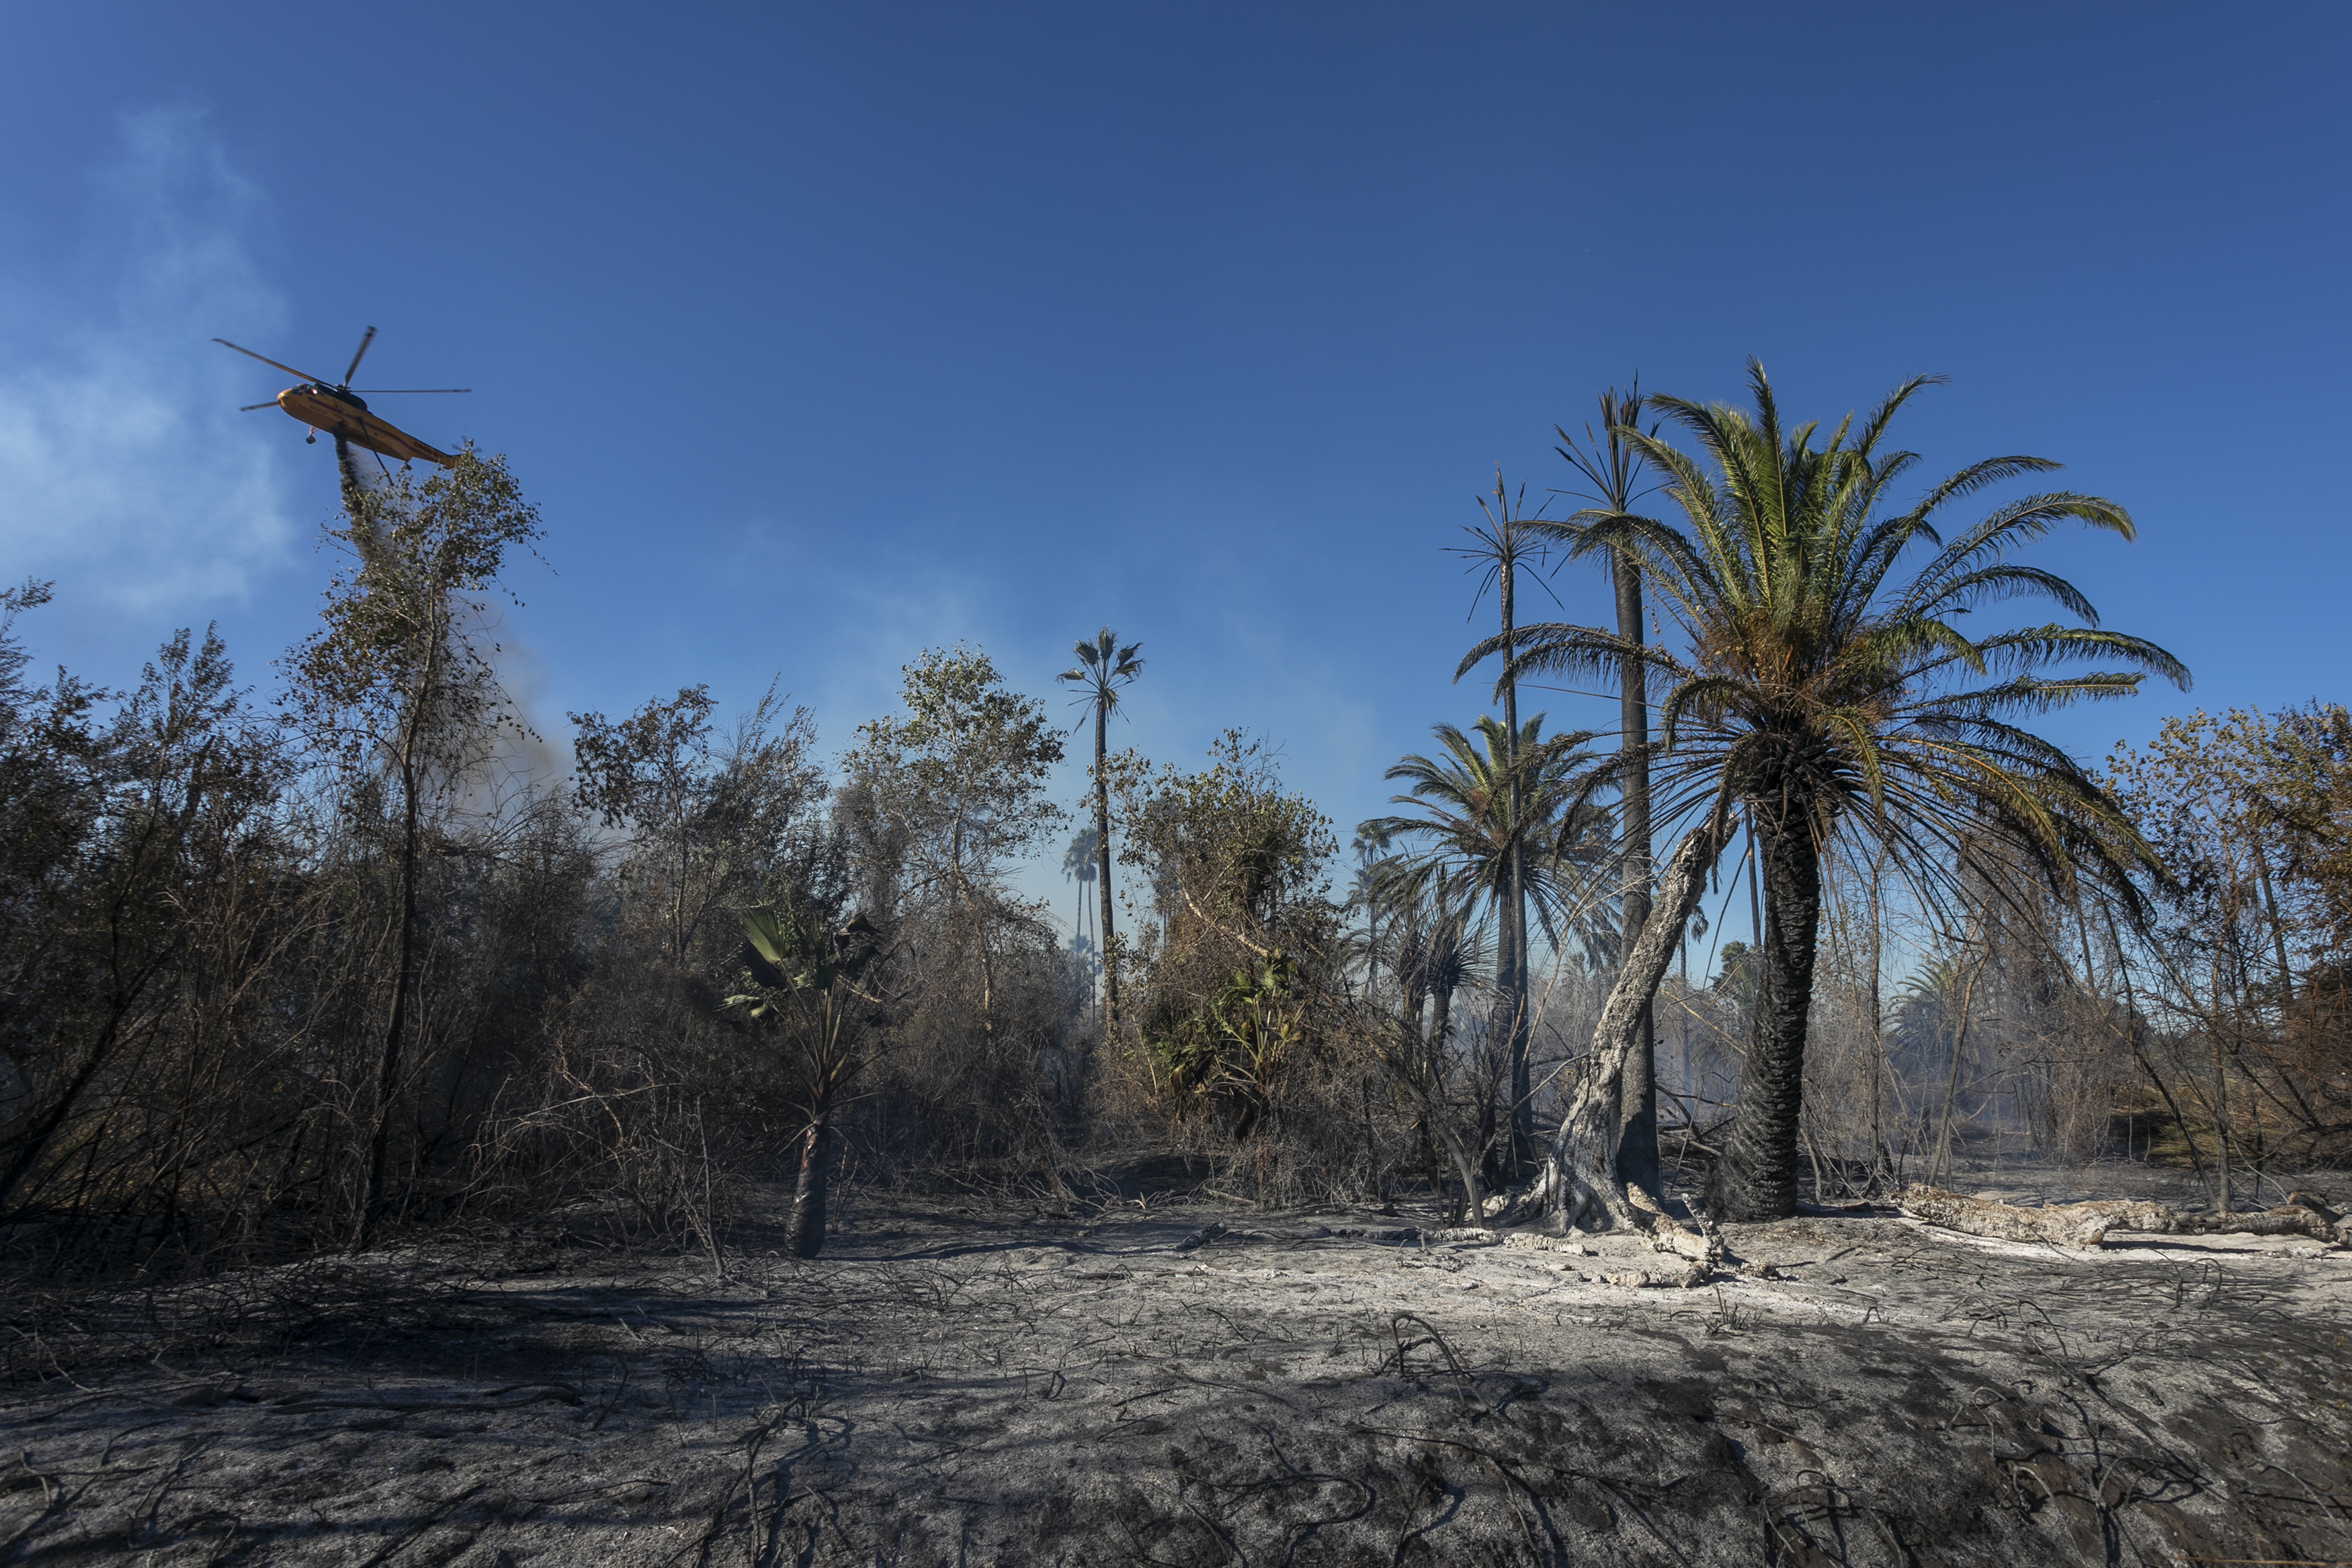 A forest in Claifornia charred by wildfire, the risk of which increases with climate change